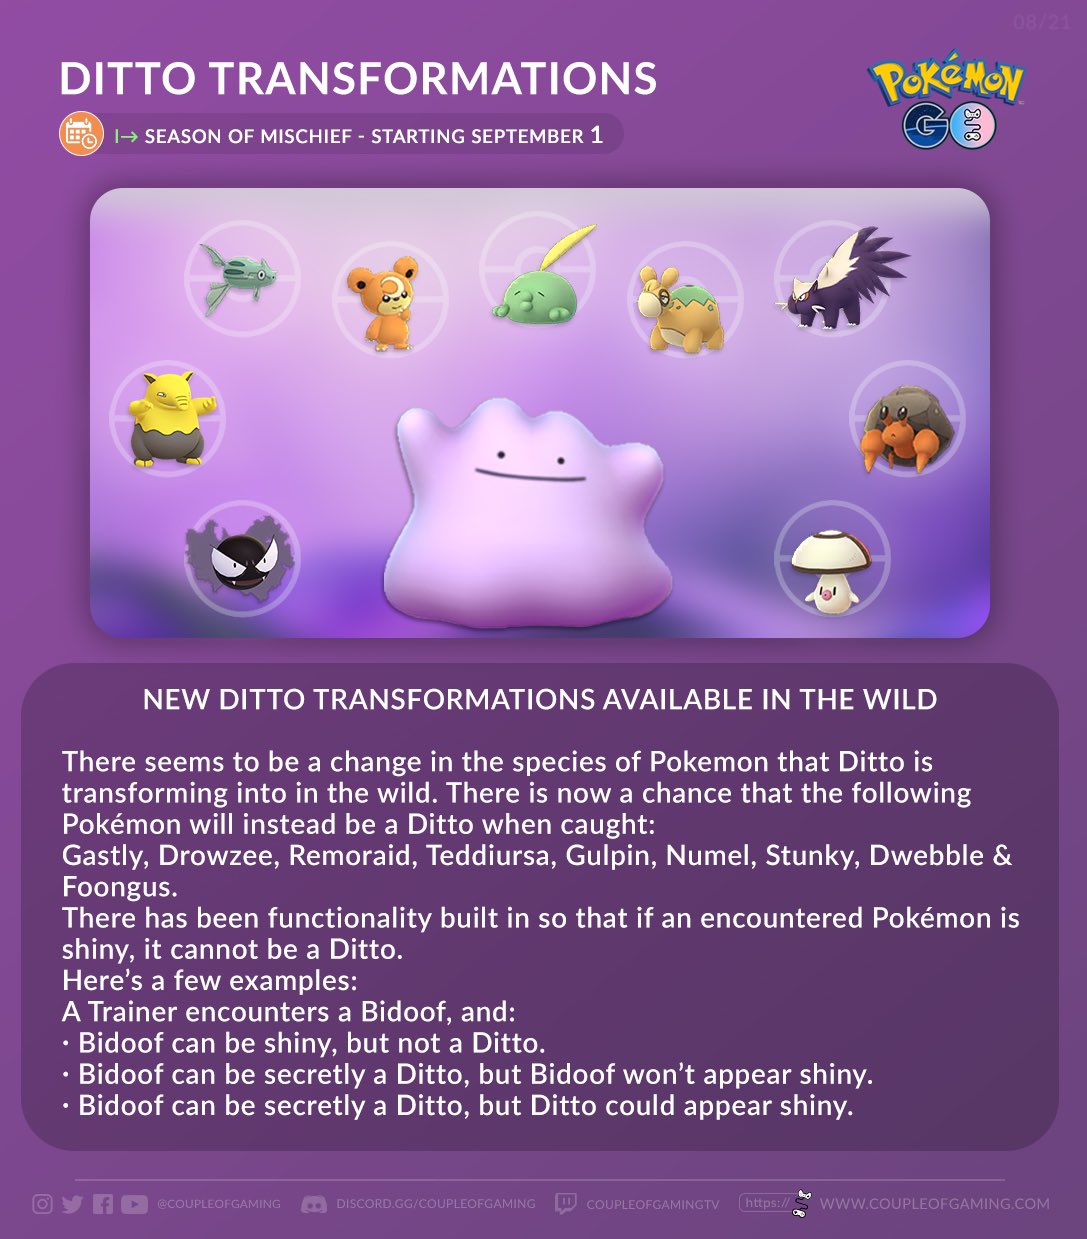 Couple of Gaming on X: #Ditto had its morph pool updated to the